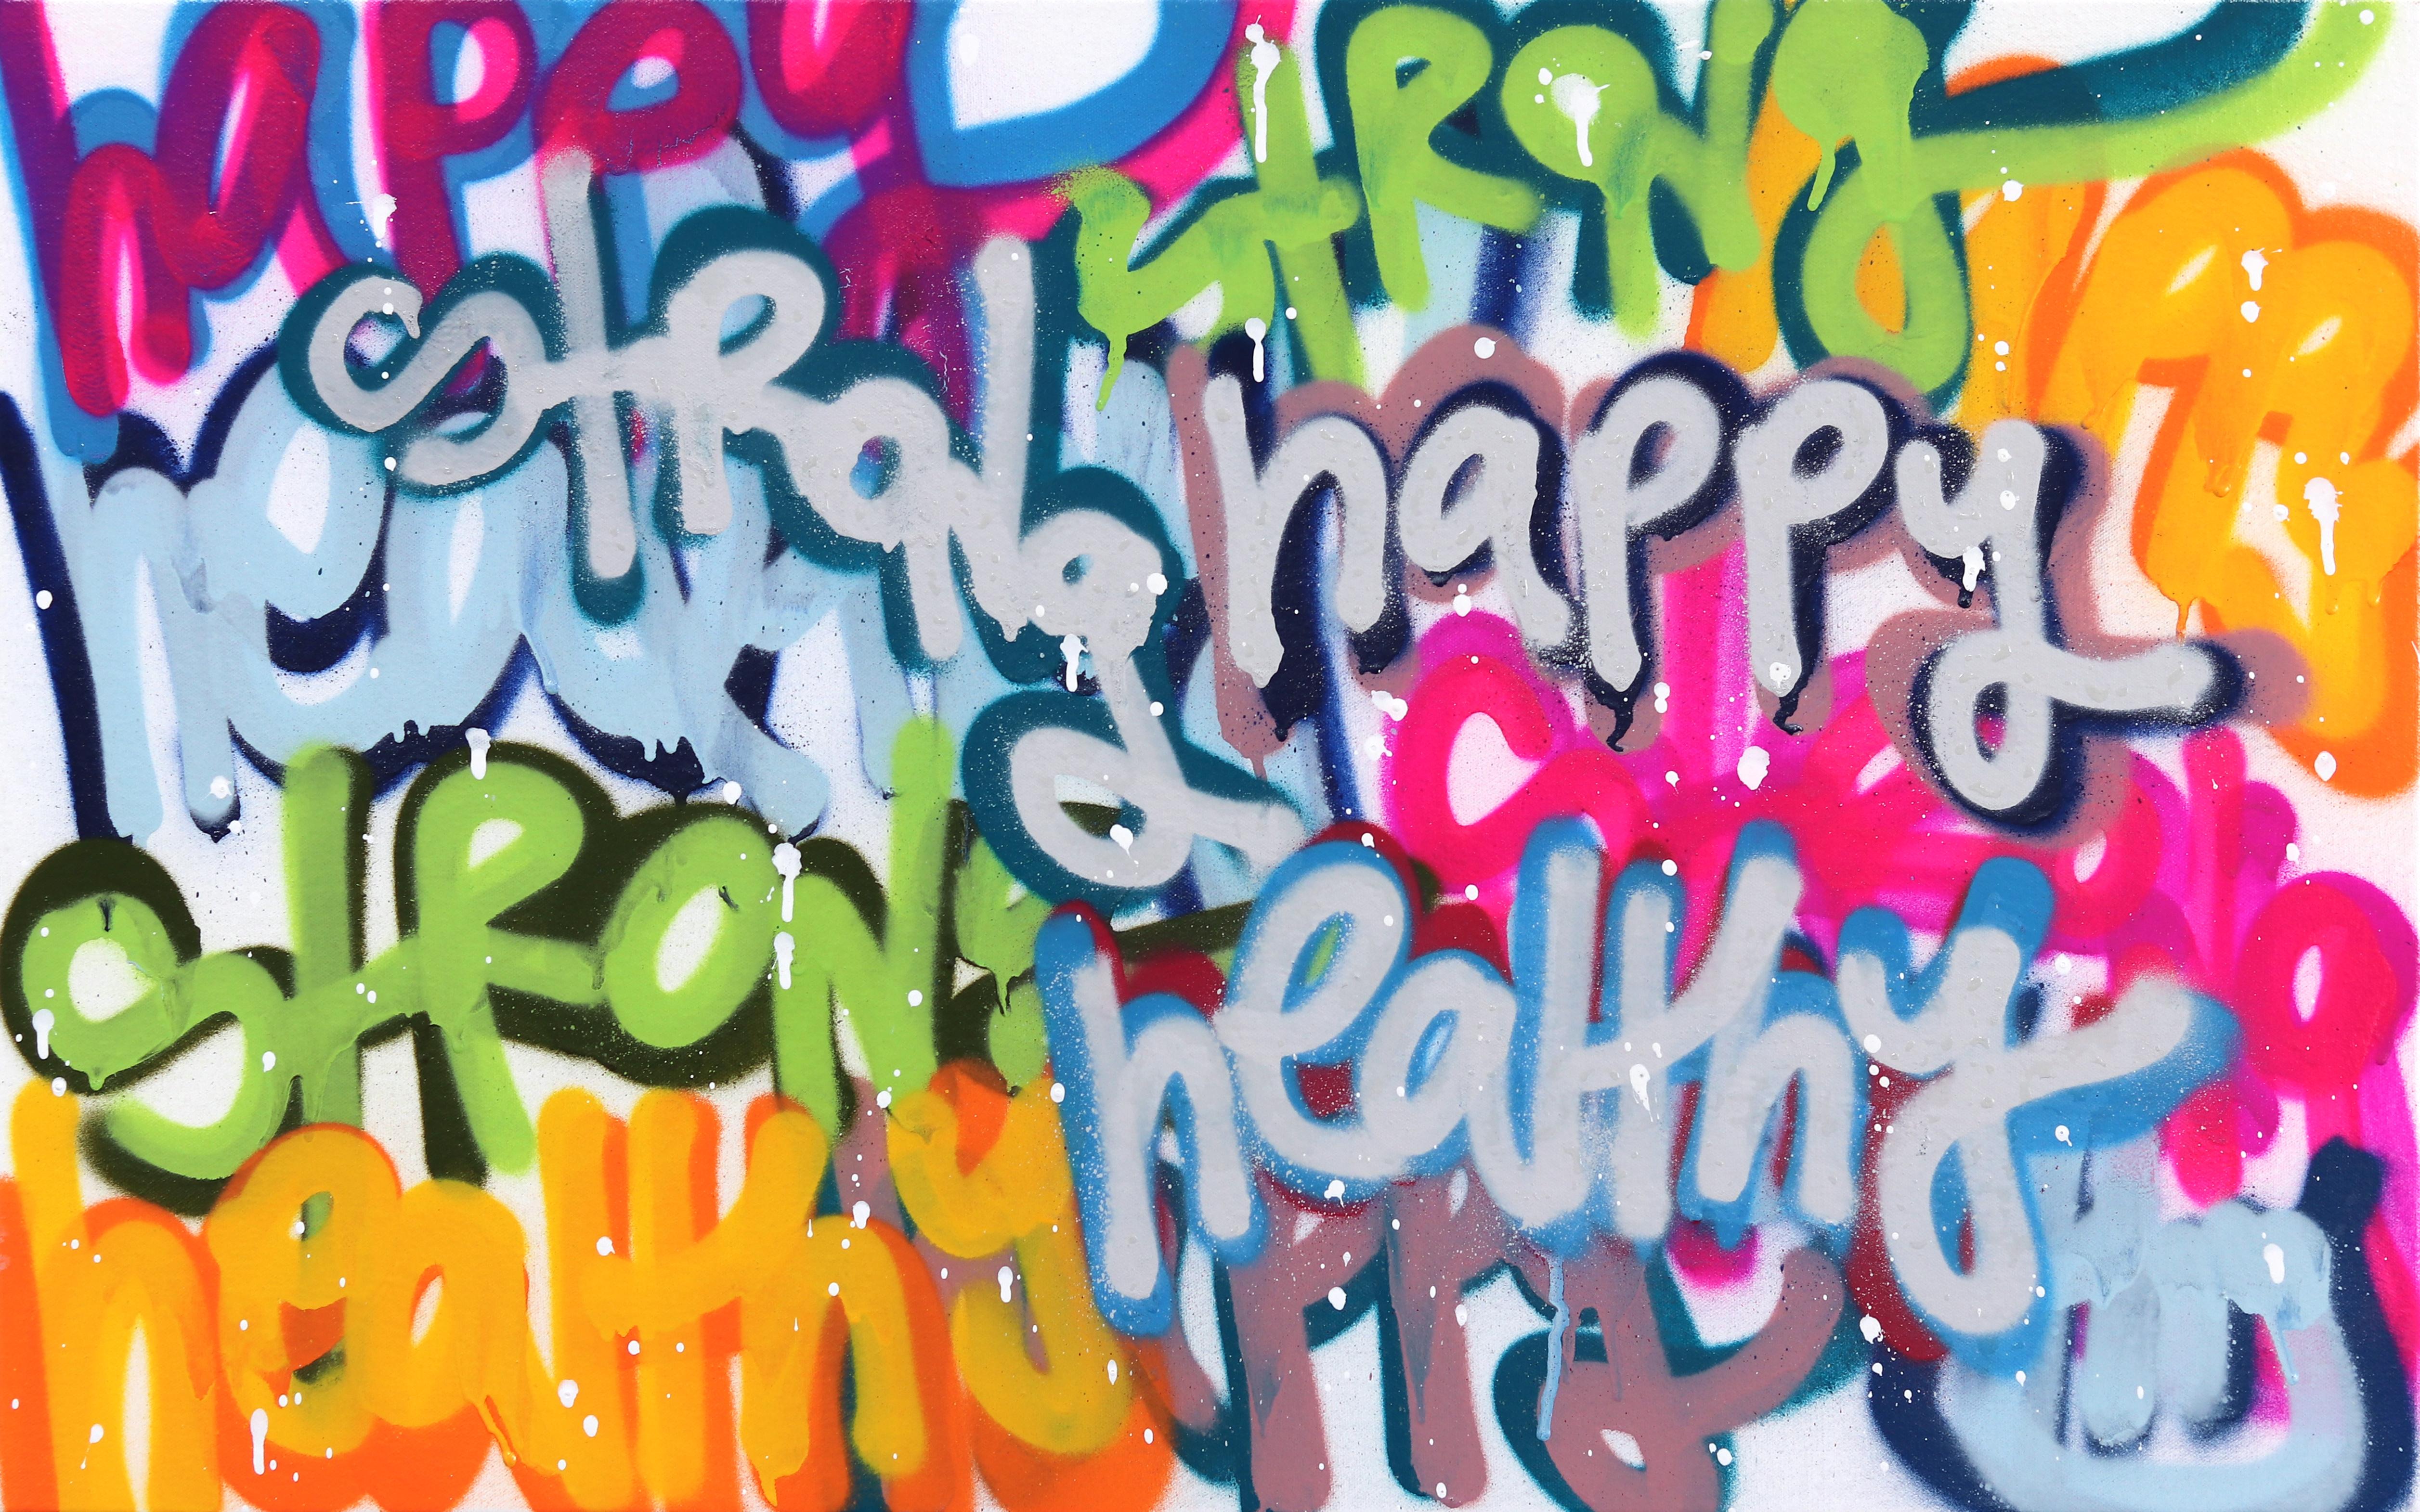 Strong, Happy, Healthy - Original Colorful Urban Love Pop Street Art Painting - Mixed Media Art by Amber Goldhammer